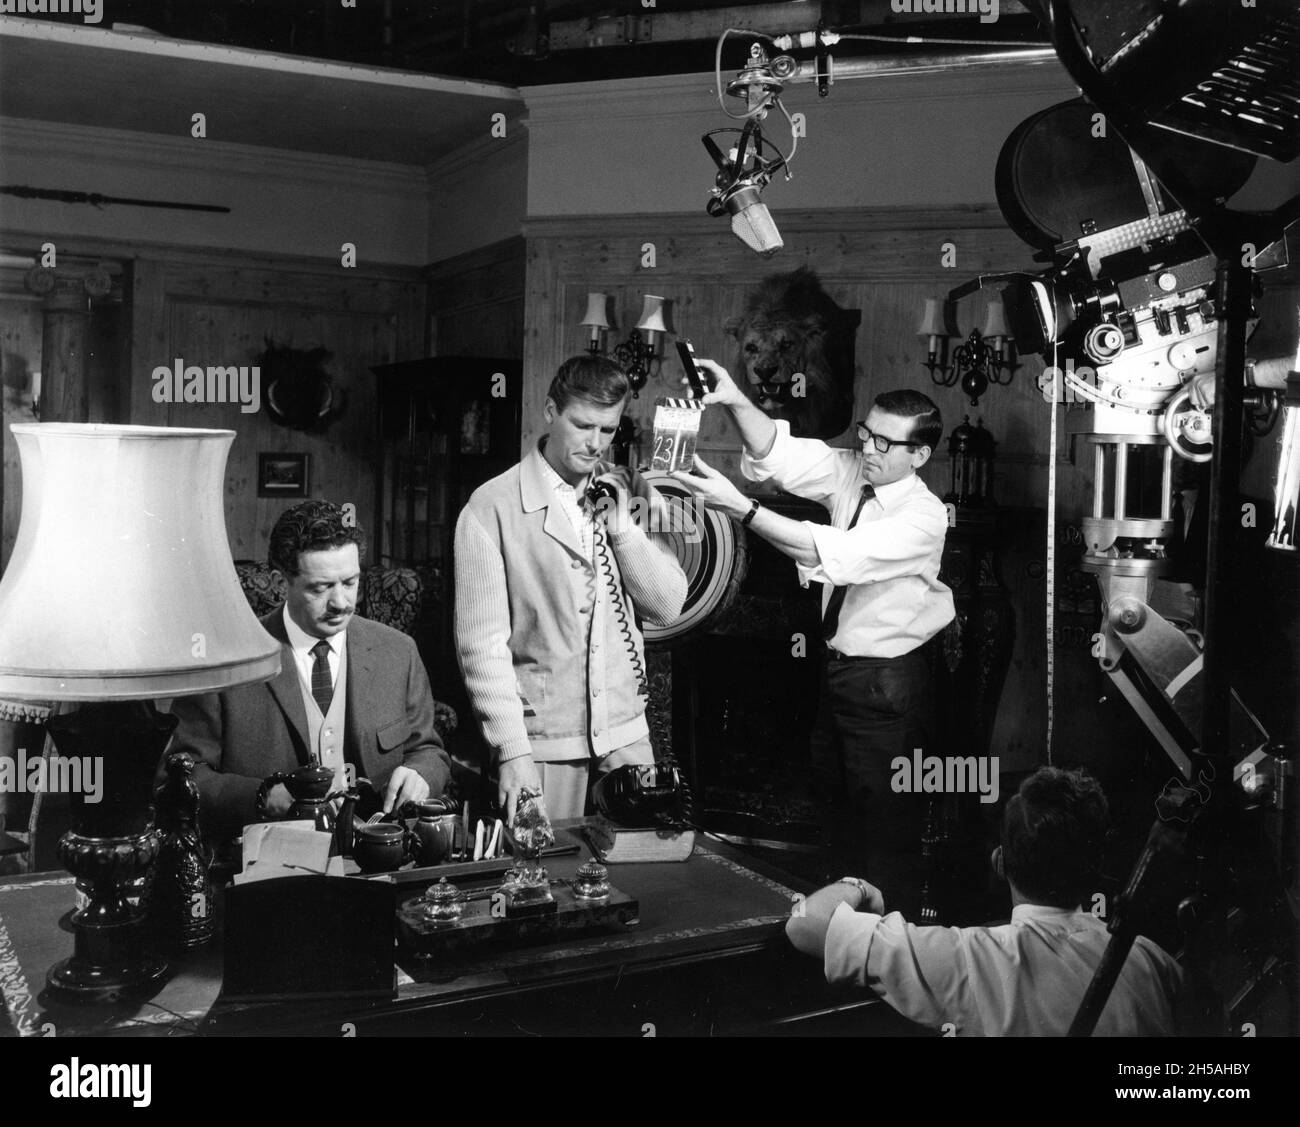 JOHN GREGSON as Colonel Roberts and ROGER MOORE as Simon Templar on set candid at Associated British Elstree Studios during filming of THE SAINT episode ESCAPE ROUTE aired December 30th 1966 Season 5 Episode 13 director ROGER MOORE writer Leslie Charteris screenplay Michael Winder music Edwin Astley producer Robert S. Baker Bamore / Incorporated Television Company (ITC) Stock Photo